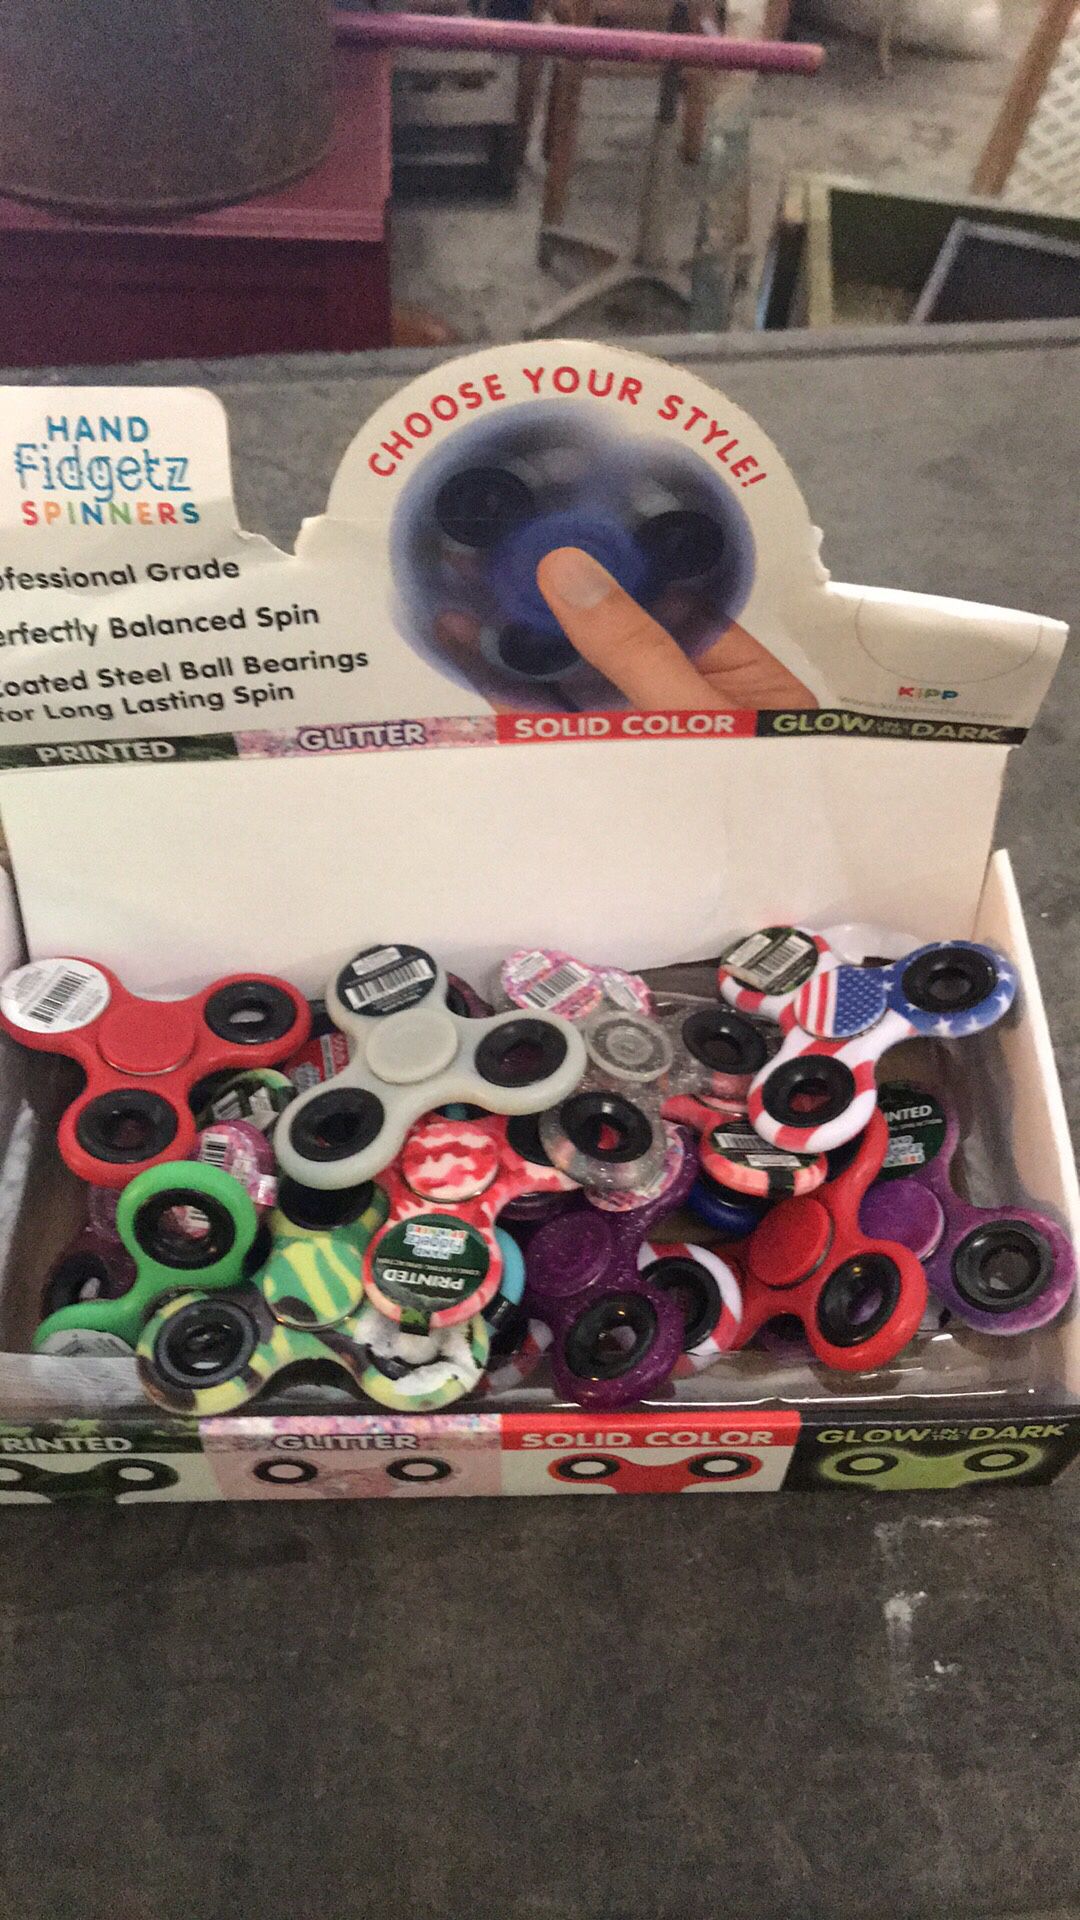 Case of fidget Spinners new in box 144